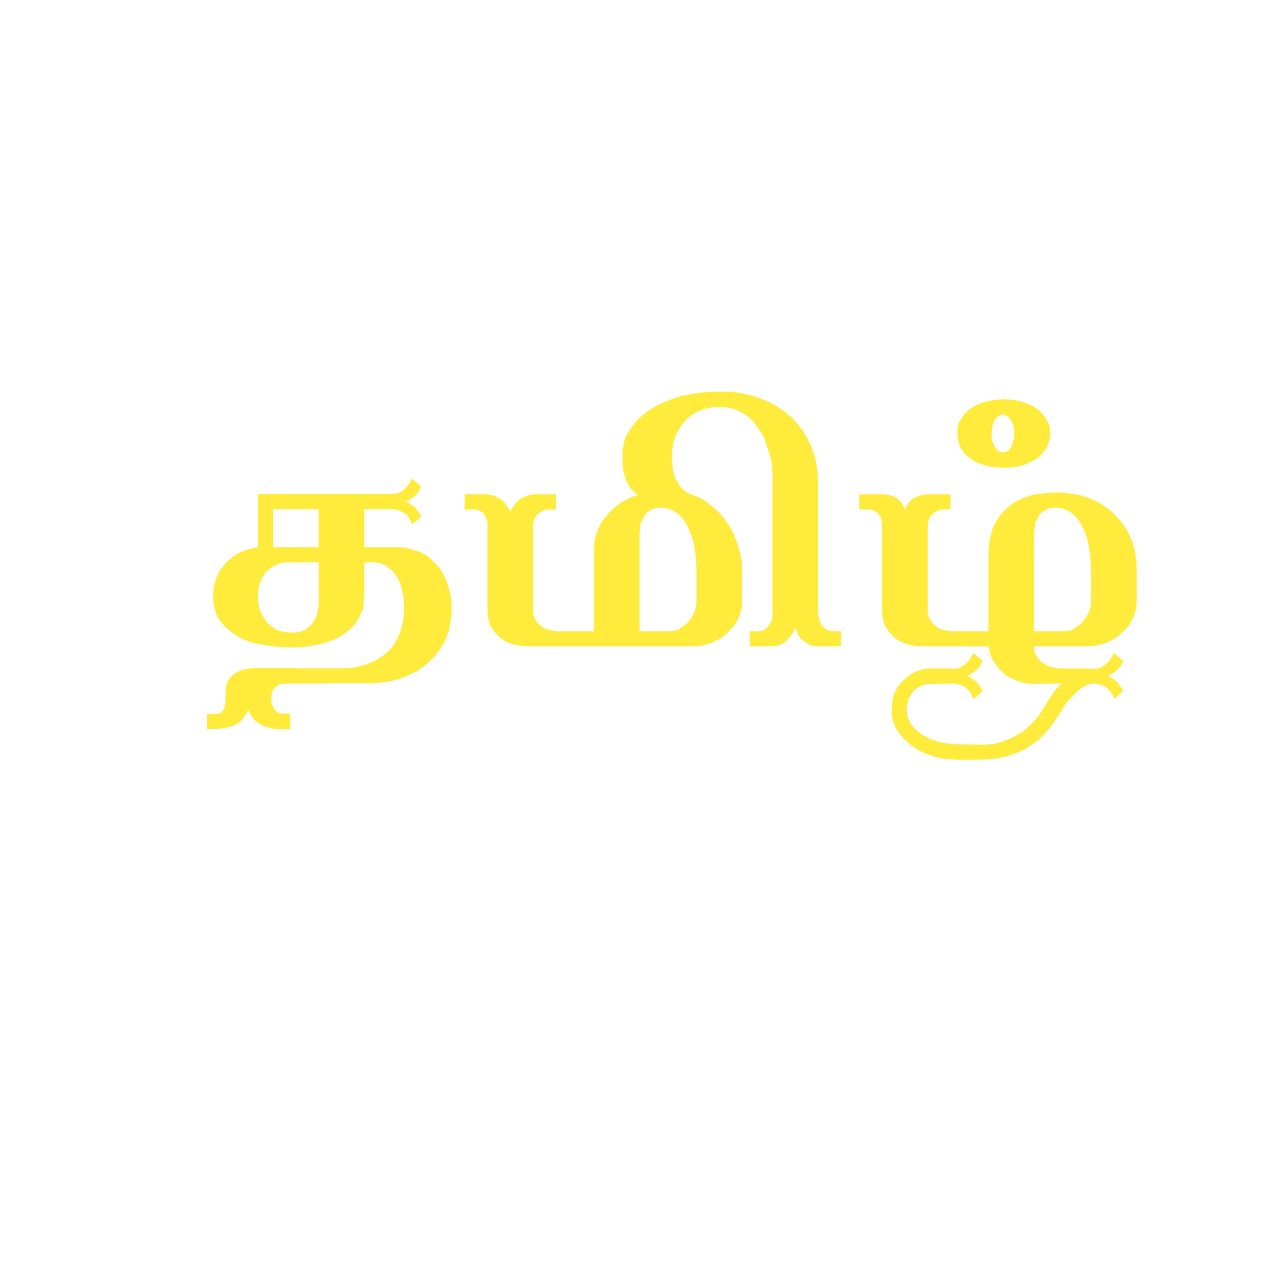 Download Tamil font ttf collection 23- download free tamil fonts_ stylish tamil fonts